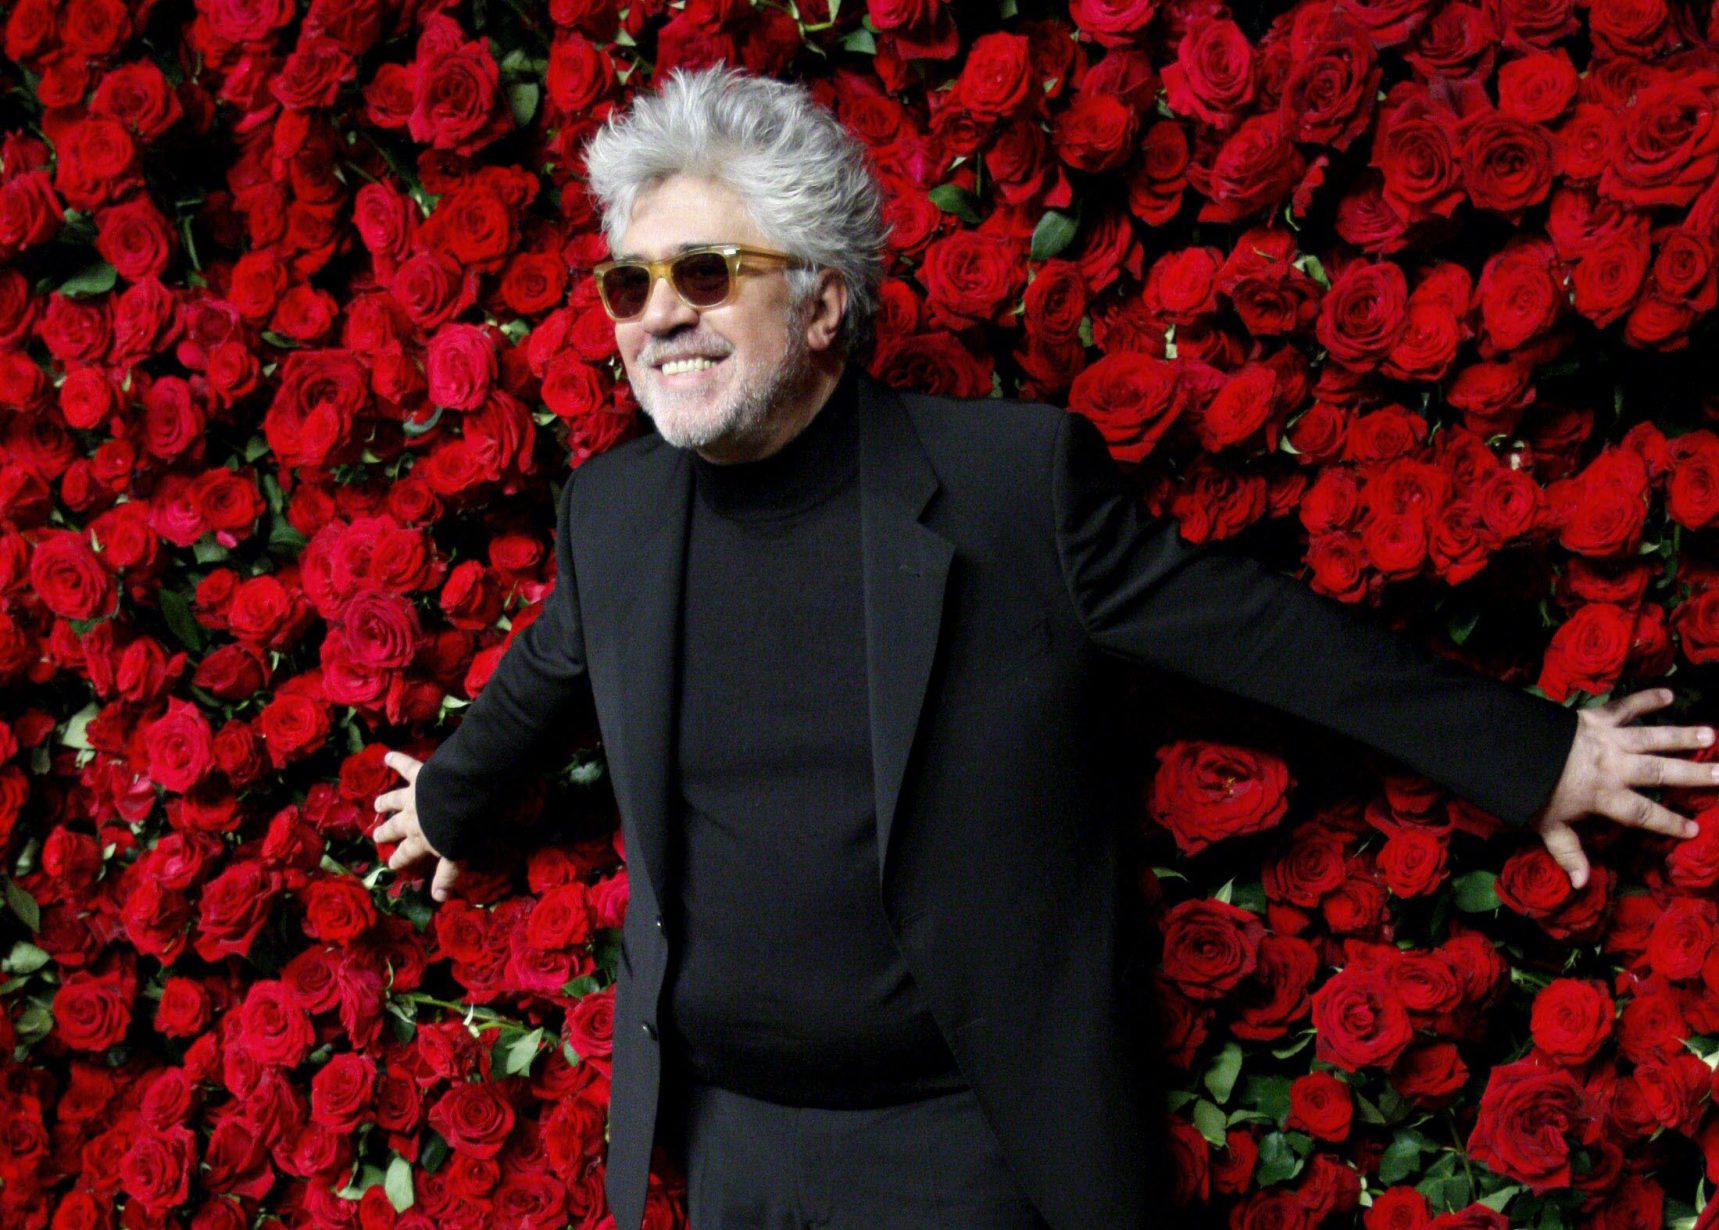 Spanish director Pedro Almodovar attends the Museum of Modern art's fourth annual Film Benefit in New York November 15, 2011. REUTERS/Kena Betancur (UNITED STATES - Tags: ENTERTAINMENT) TELETIPOS_CORREO:%%%,FOTOGRAFÍA,%%%,MUSEUM